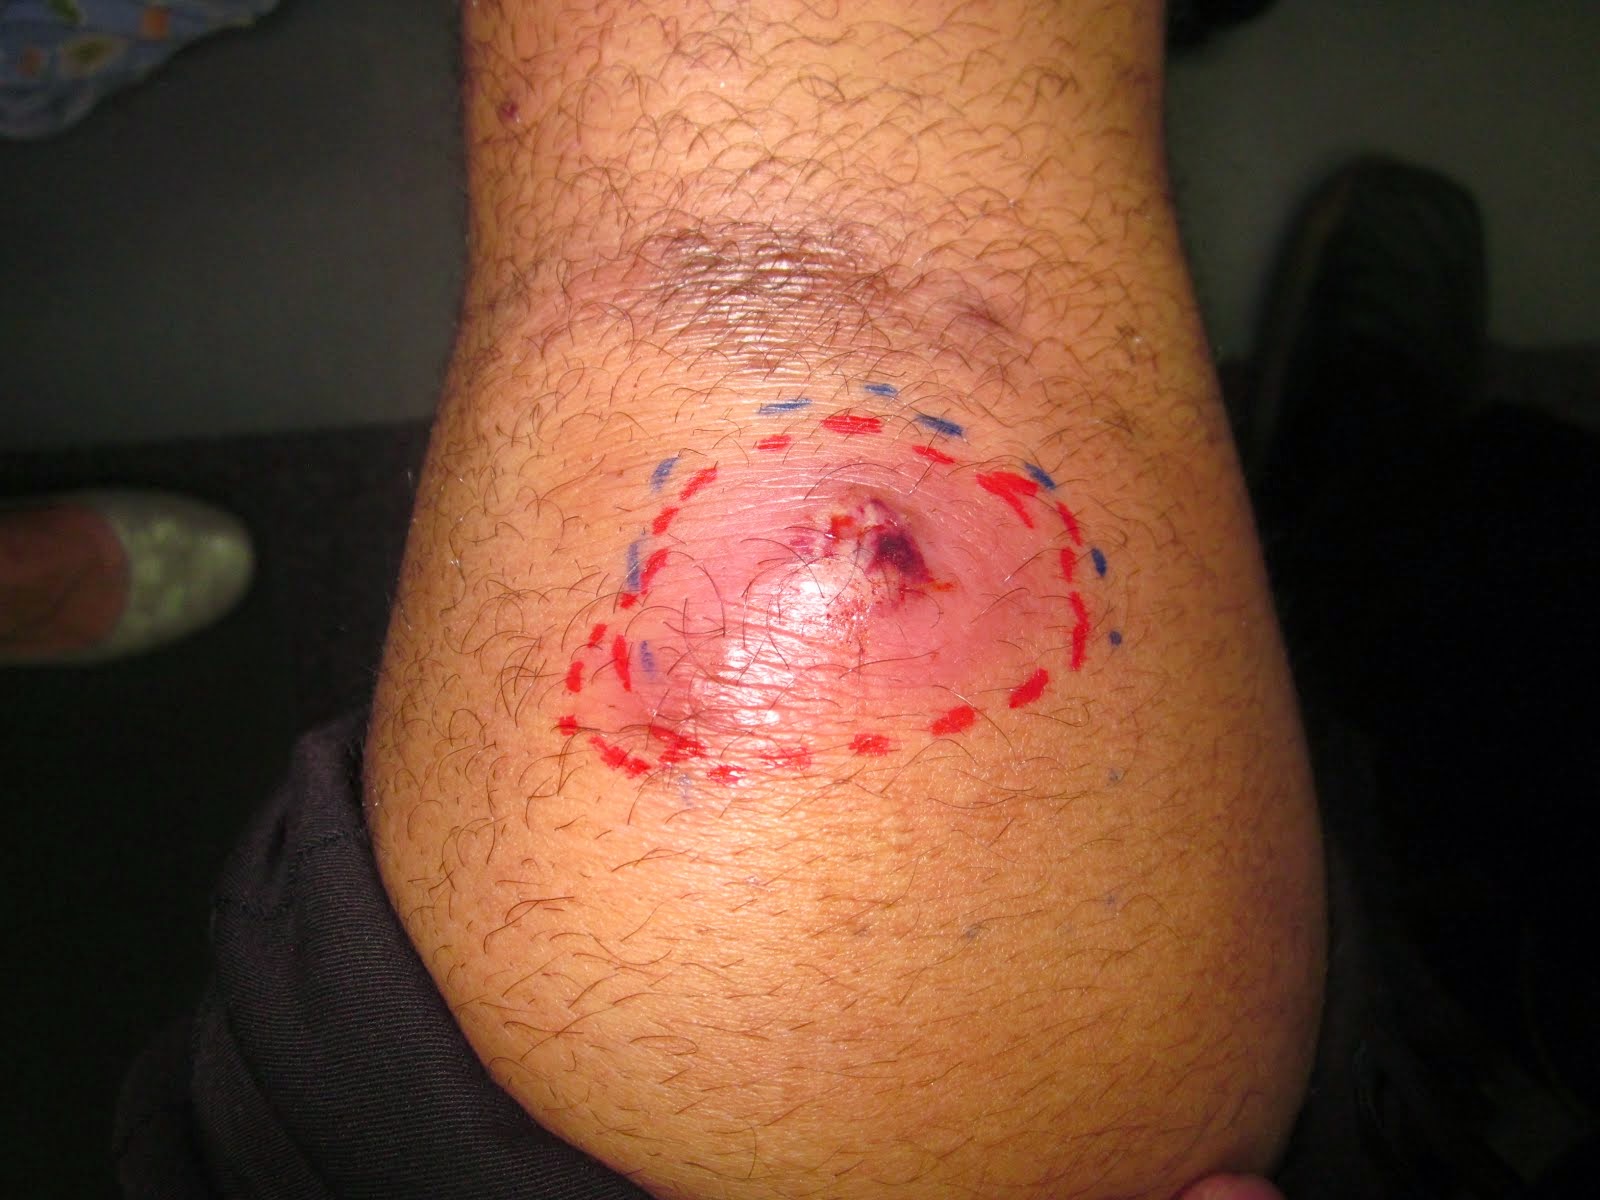 A cyst in my knee from too much praying on them lol